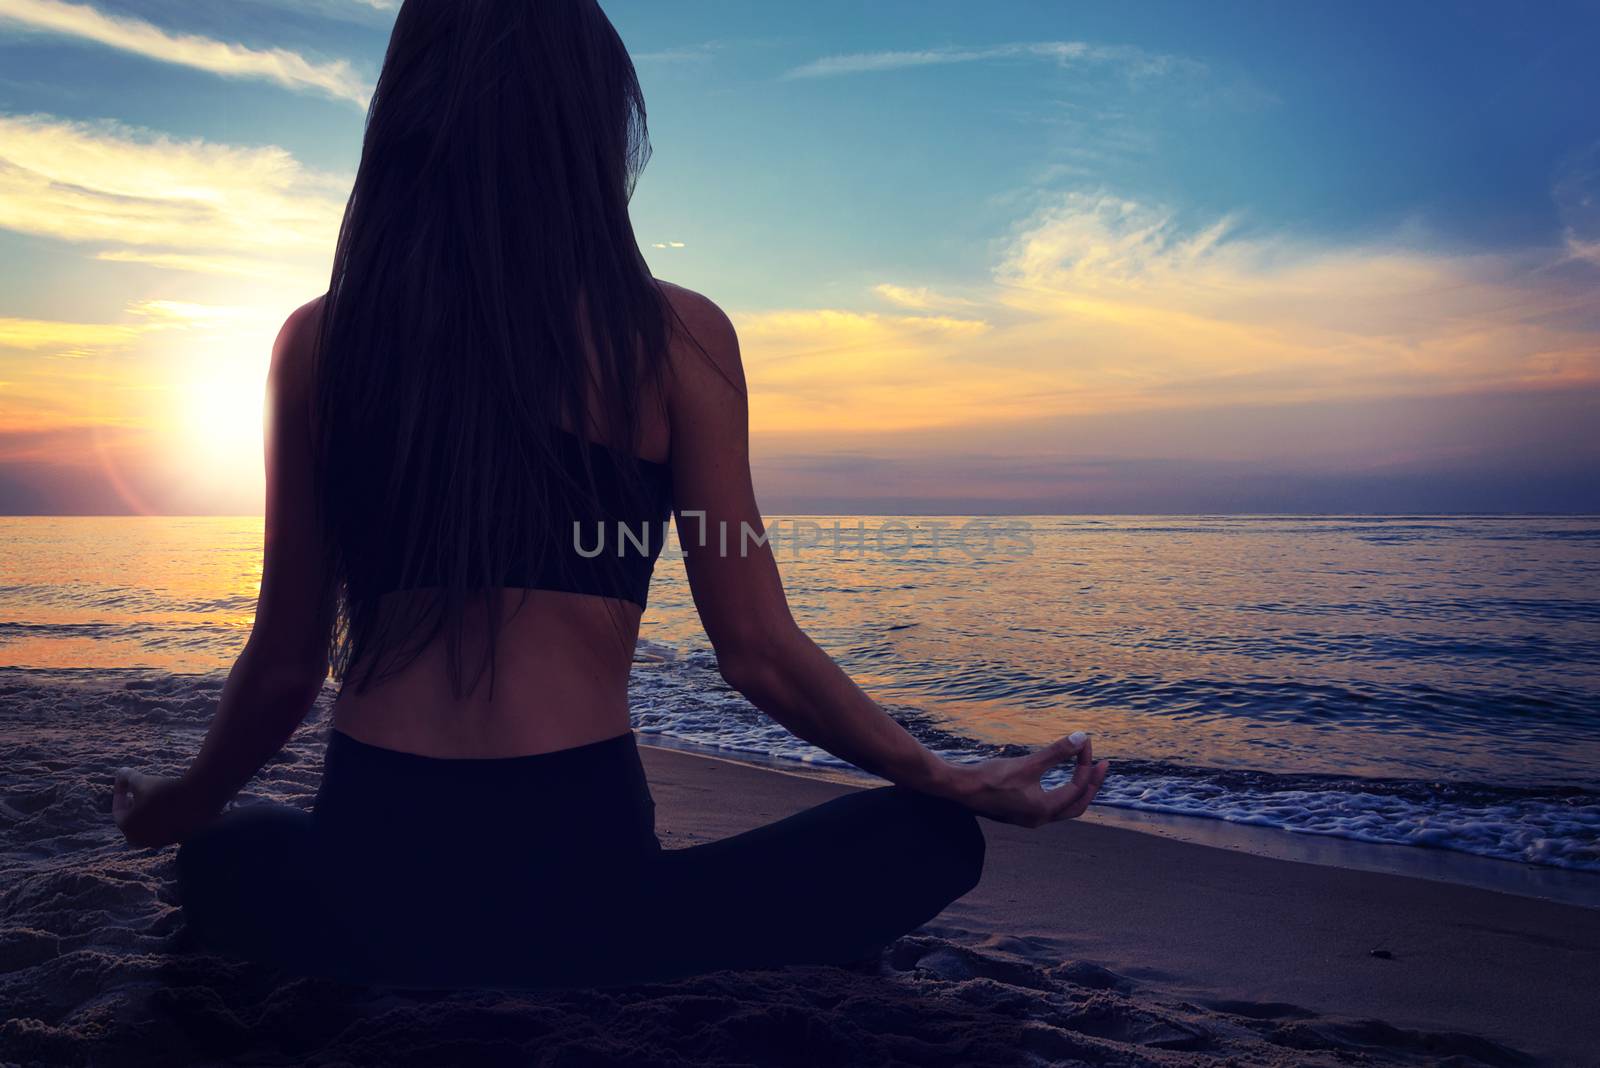 Back view of a young woman doing yoga meditation in a lotus pose at the seacoast on a sunset background.